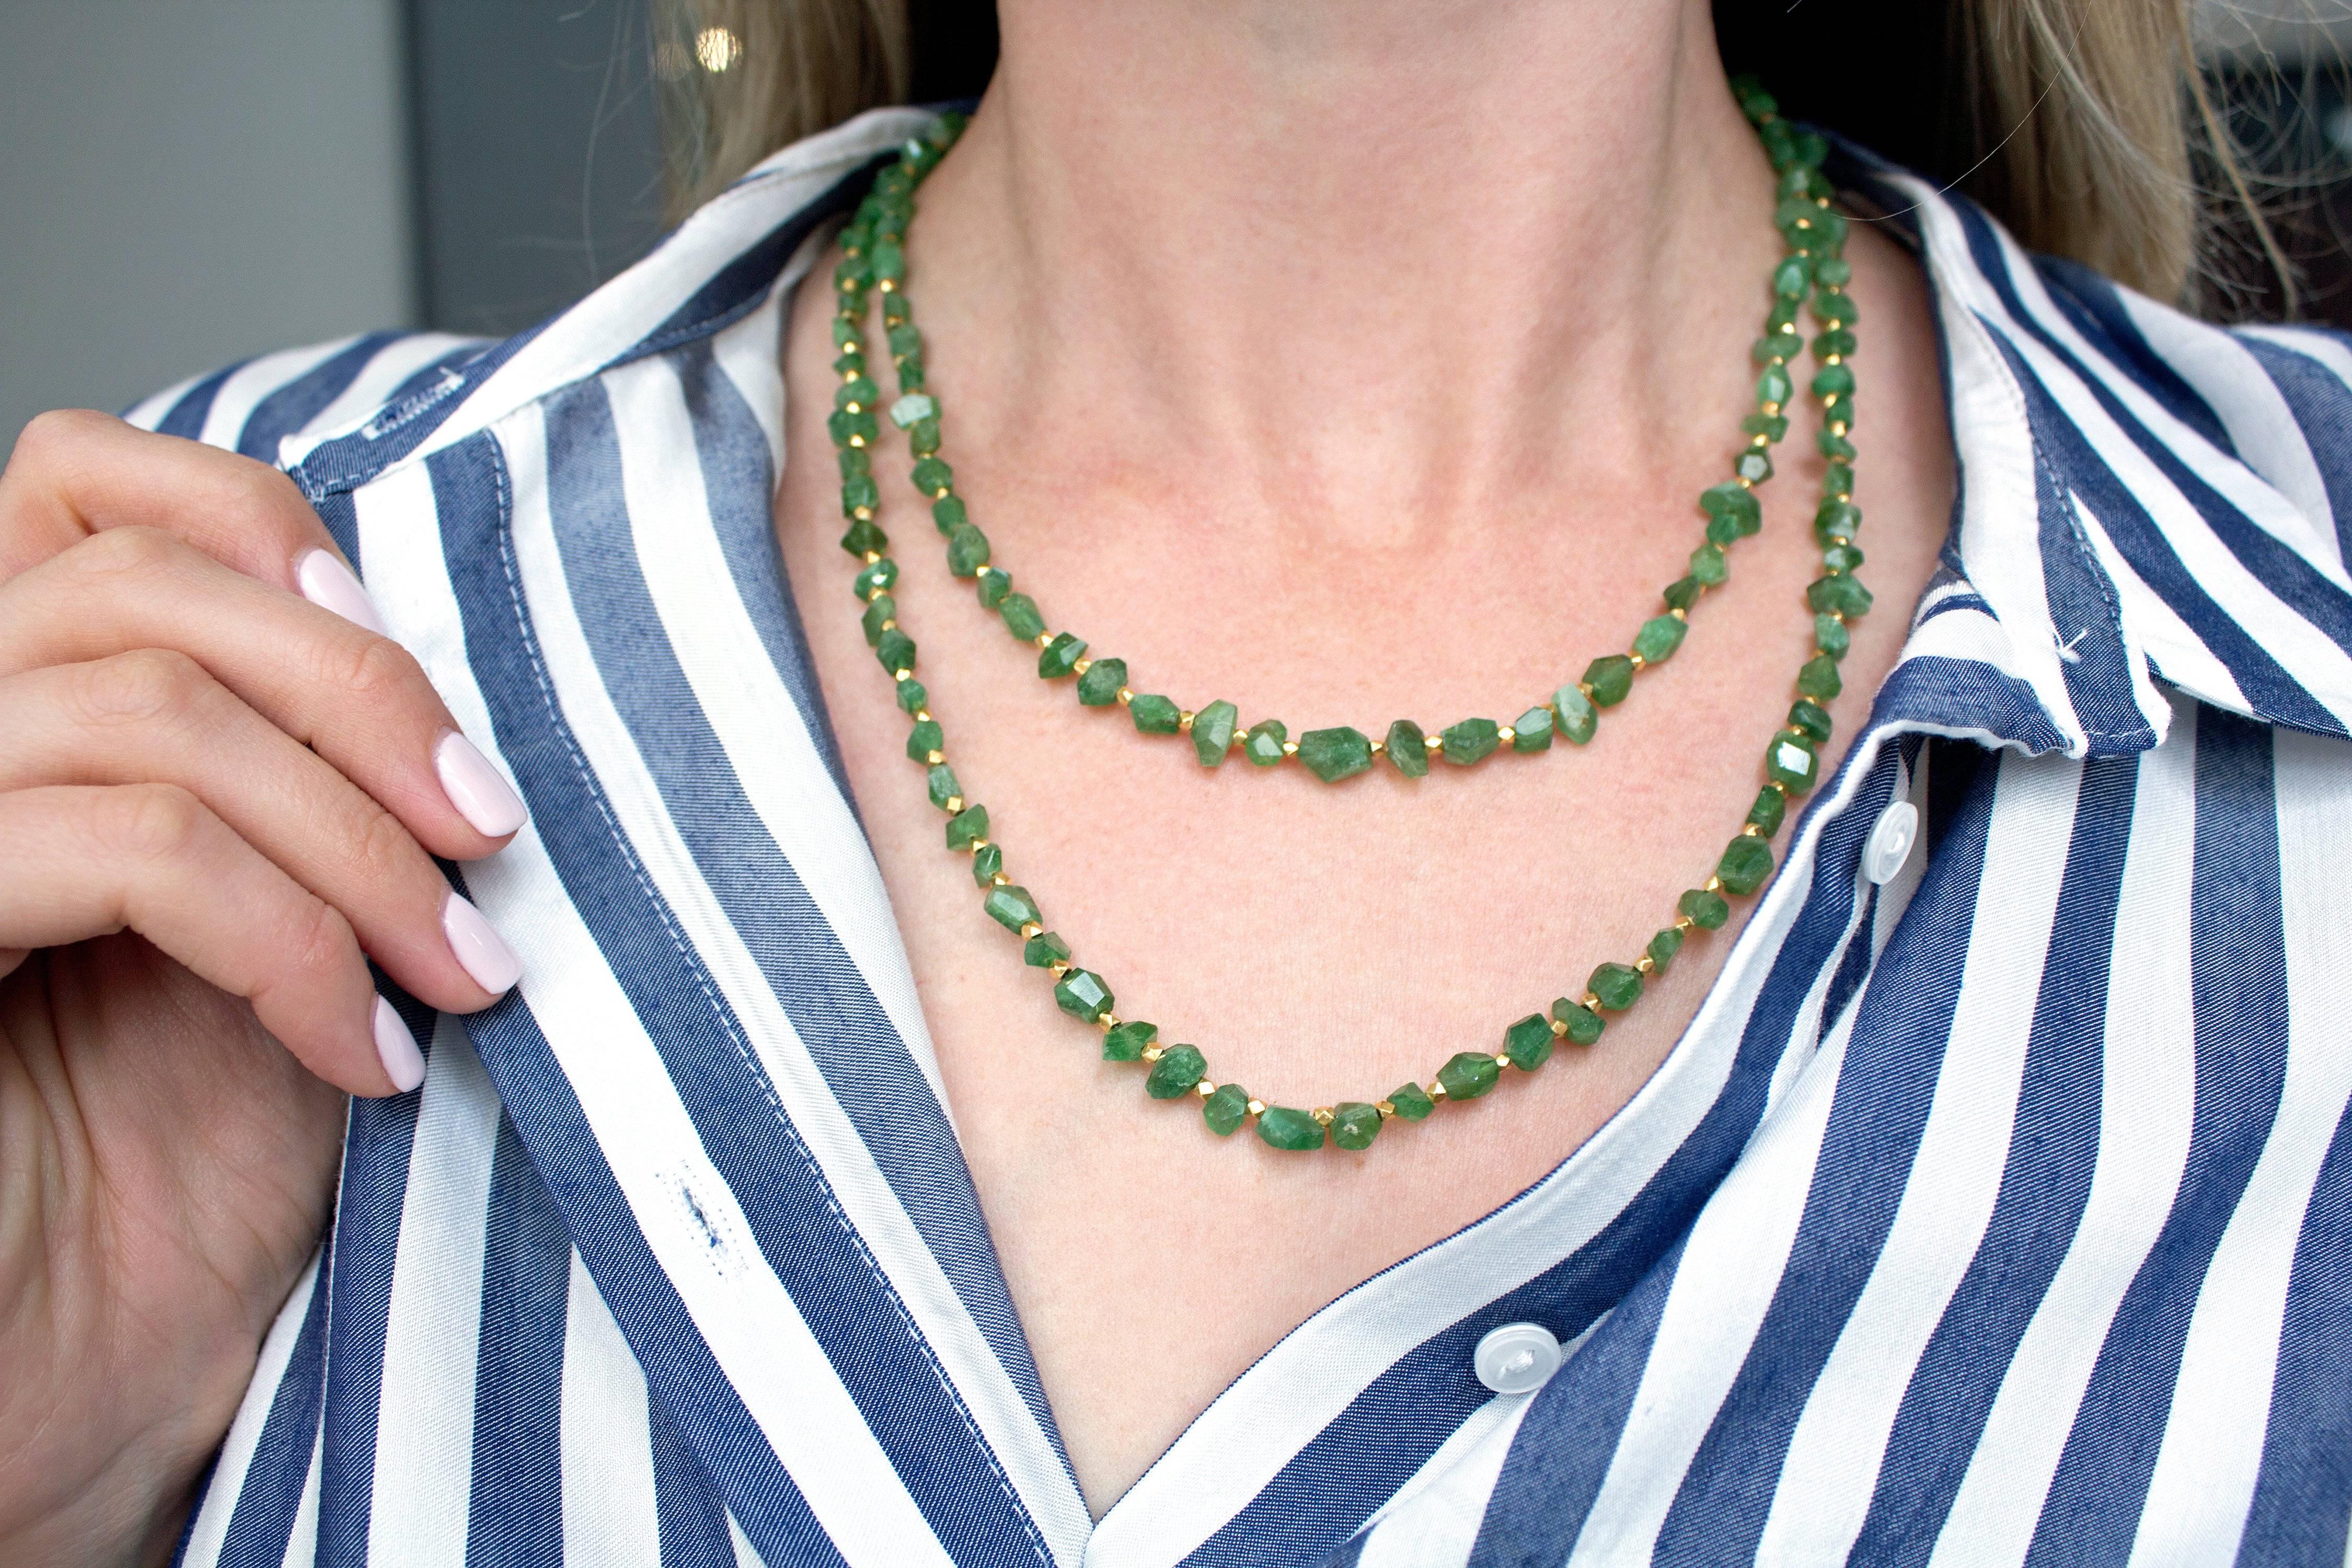 One of a Kind Necklace handcrafted with 165 total carats of faceted green tourmaline beads individually strung between 18k yellow gold faceted spacers and accented with a beaded, ornamental 'S' hook clasp. 41 inches in length.